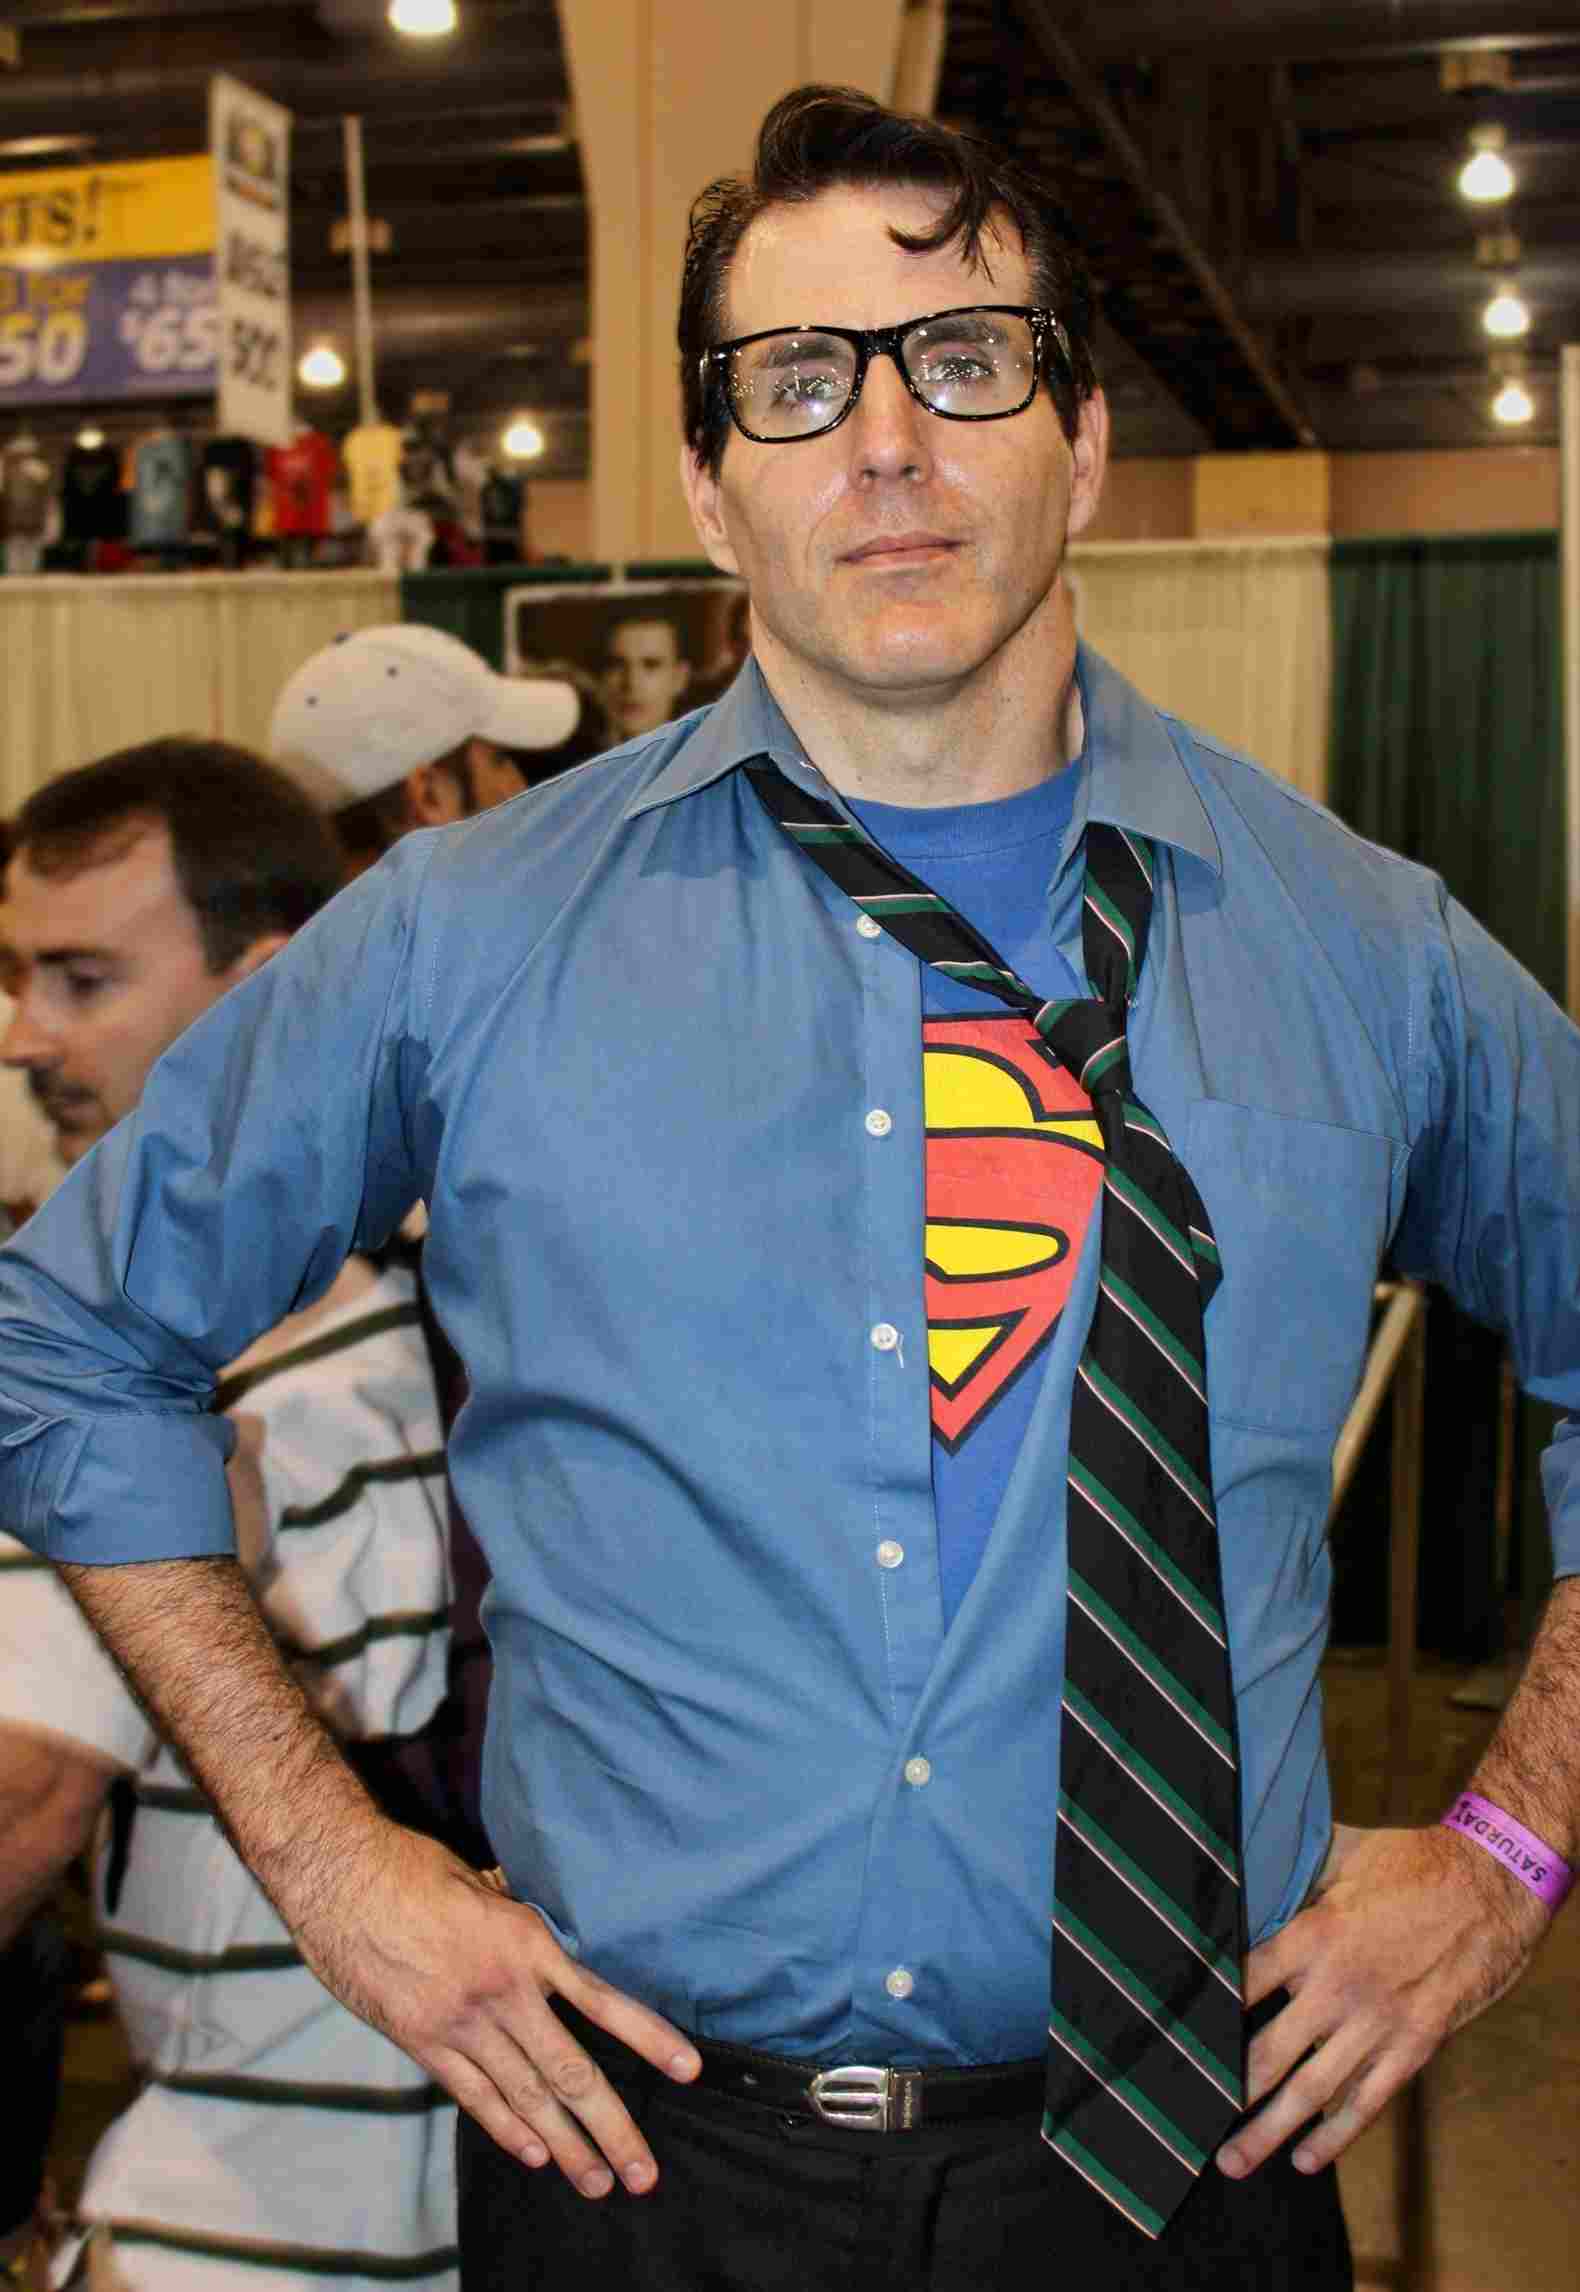 Superman costume for men just makes simple Halloween trends